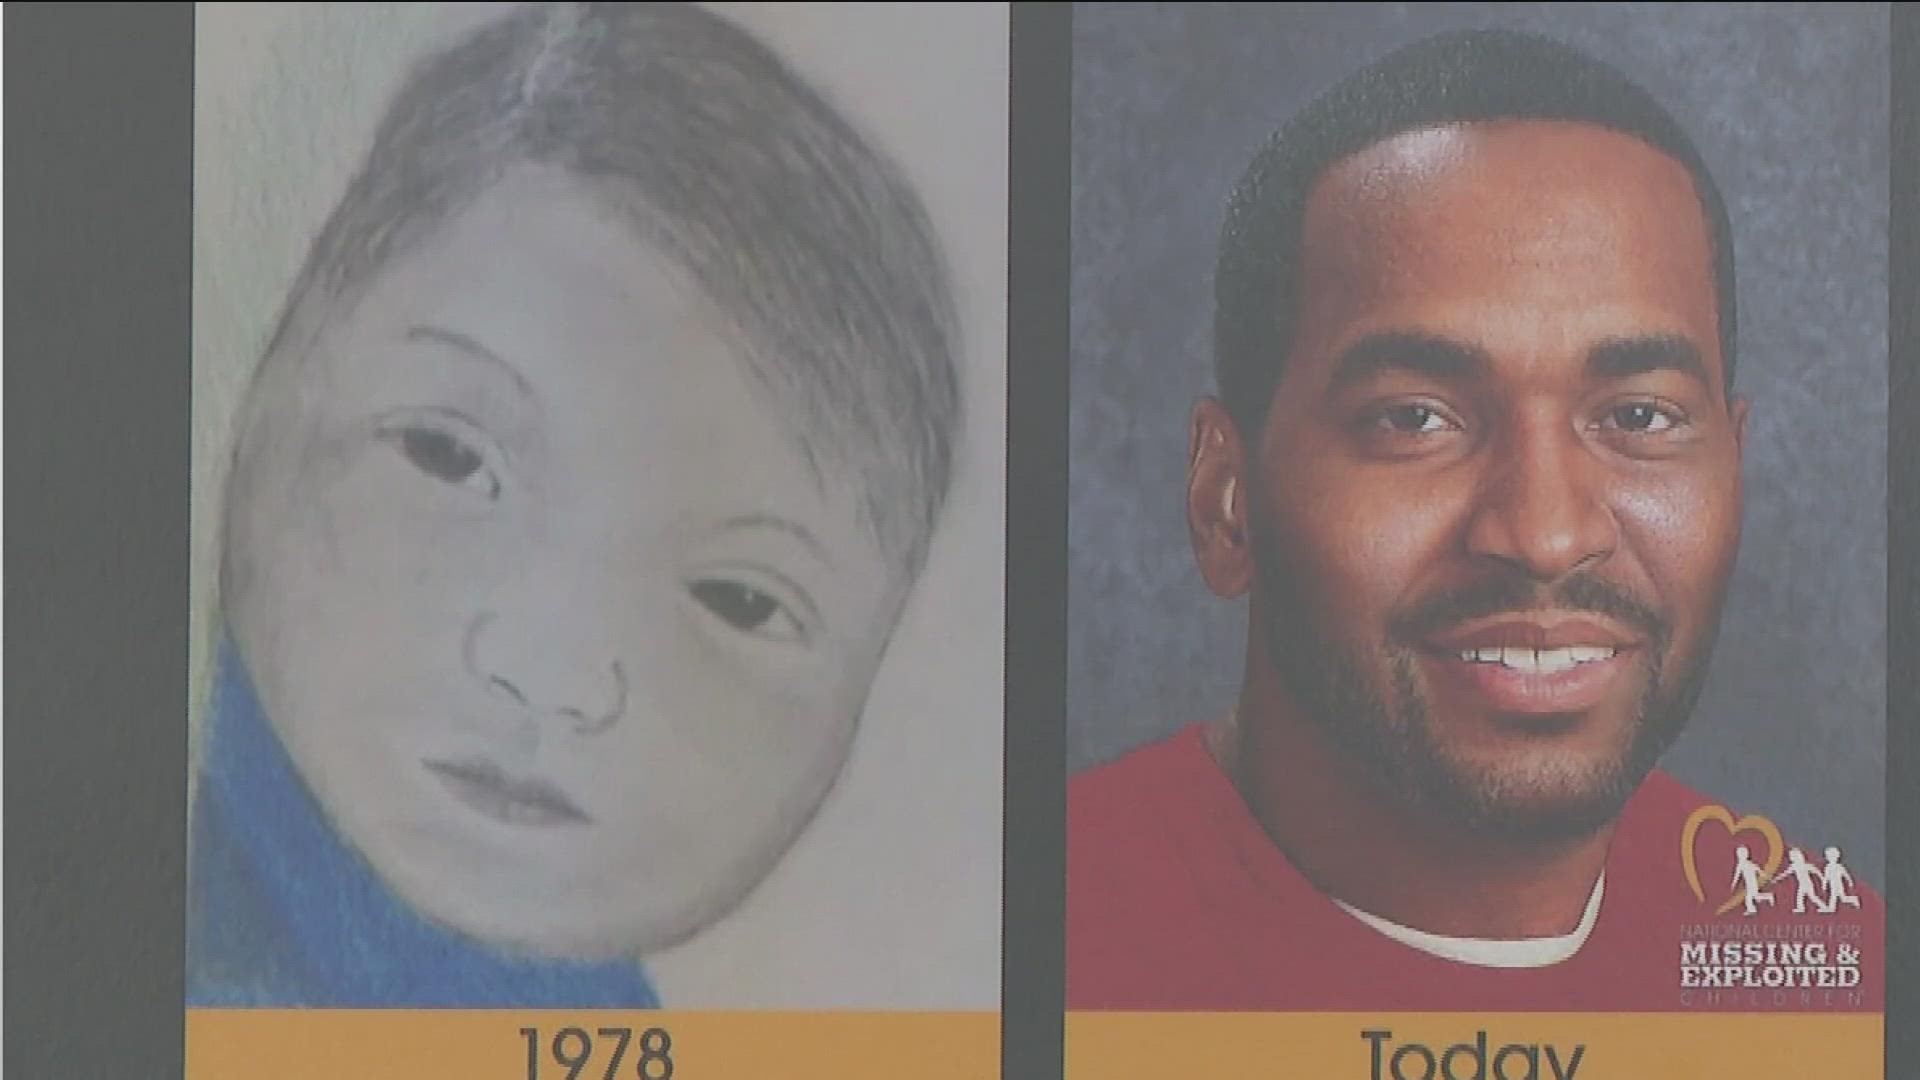 Raymond Green was only five days old when he was abducted in southwest Atlanta on Nov. 6, 1978.